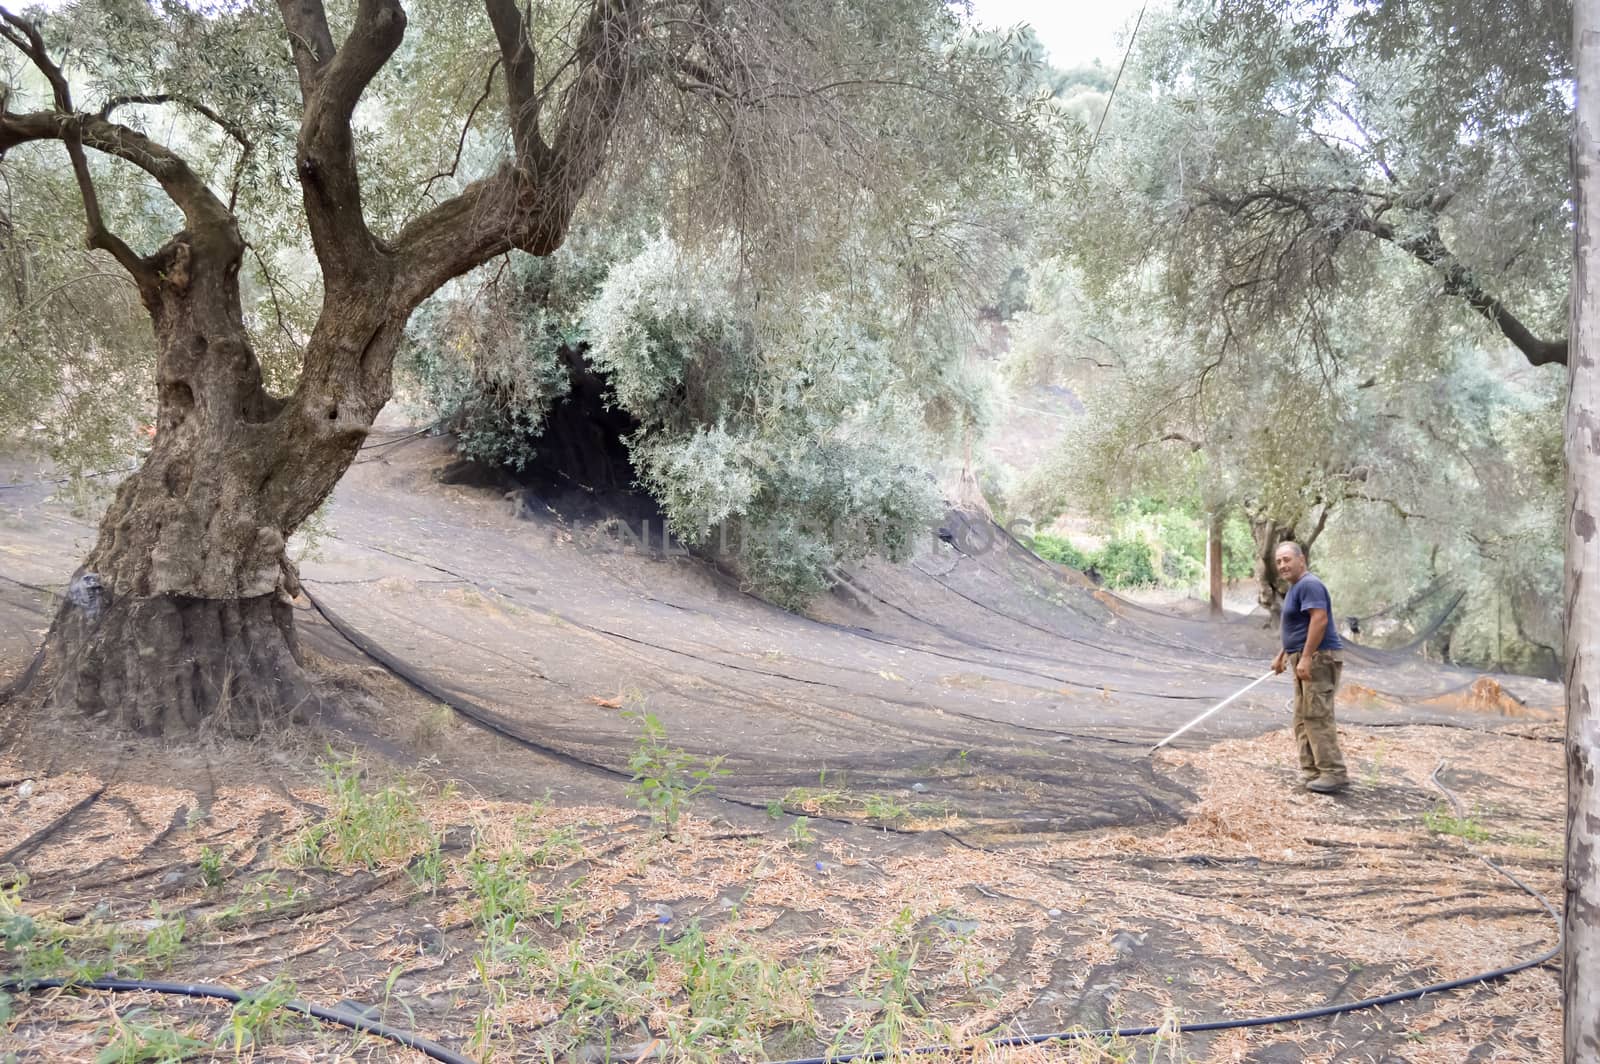 Cretan farmer who cleans the harvesting nets of olives in the mountains